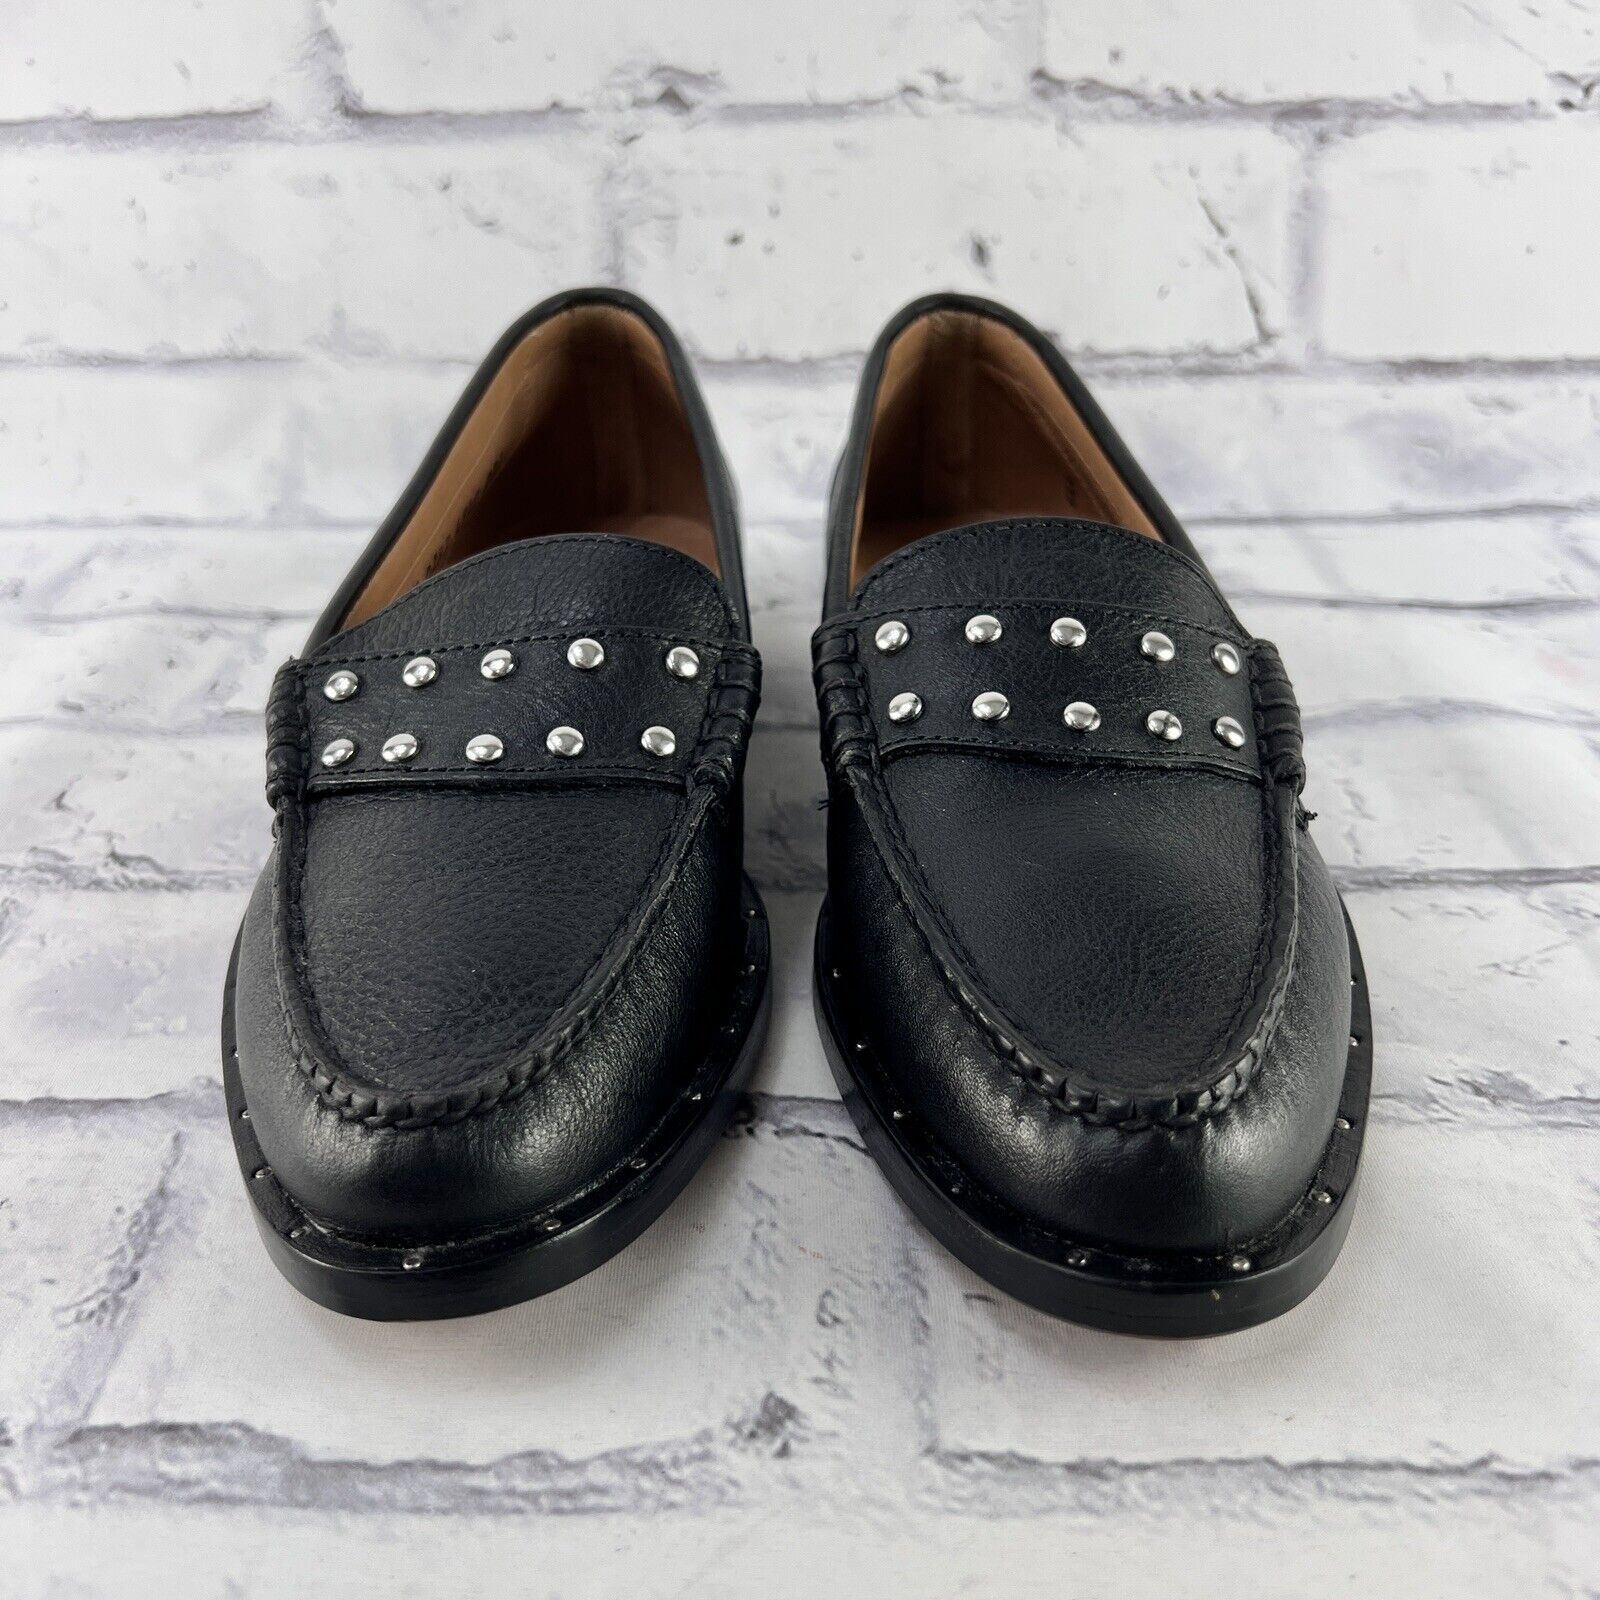 G.H. Bass Weejuns Studded Loafers Womens Size 7 Black Classic Comfort Shoe